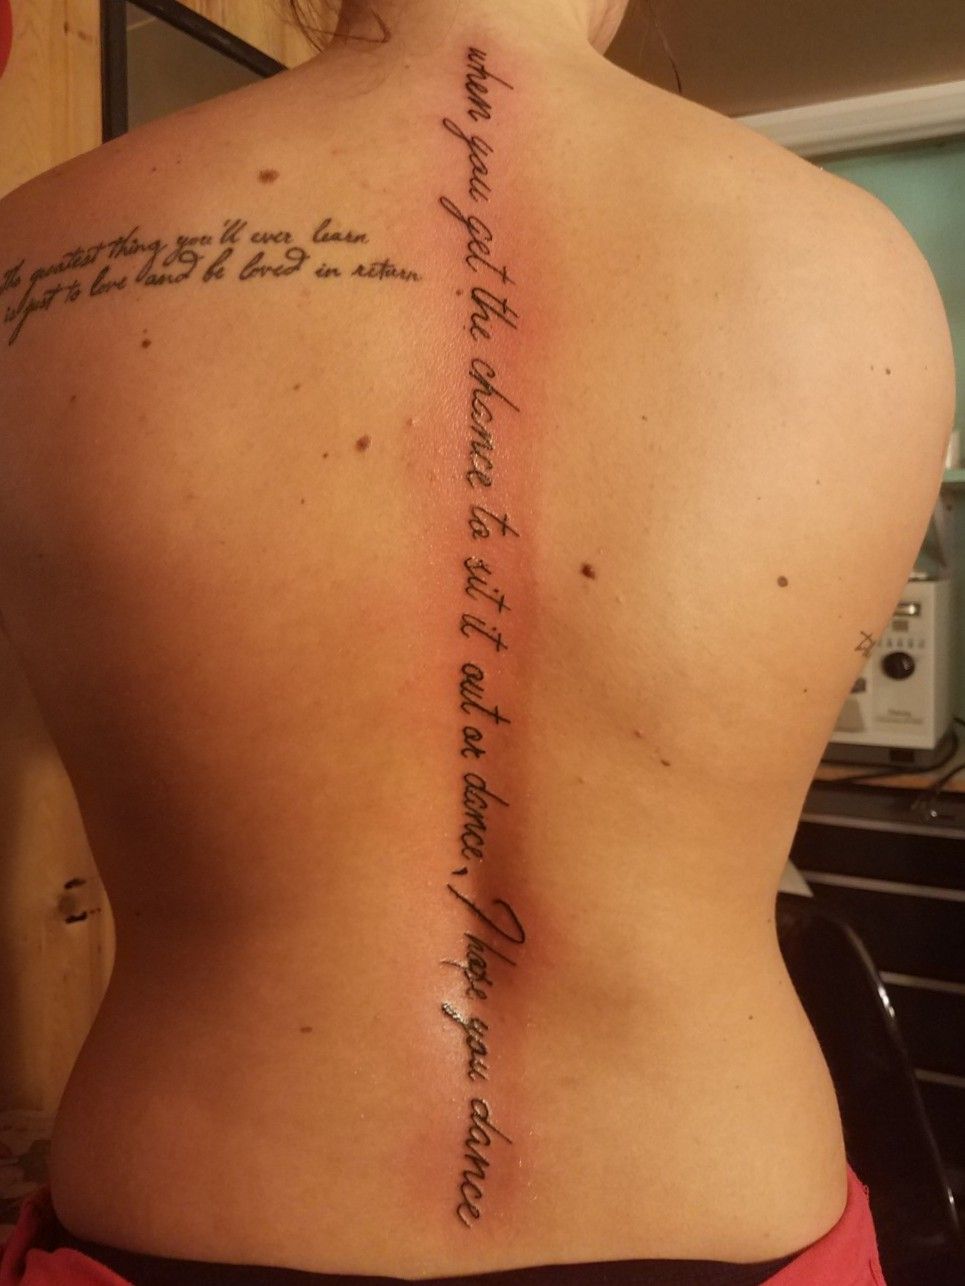 Jessica Parks on Twitter My new tattoo on my collarbone its dedicated  to my mom and its in her handwriting its her song to mee   httptcozgAlcXo8p3  Twitter